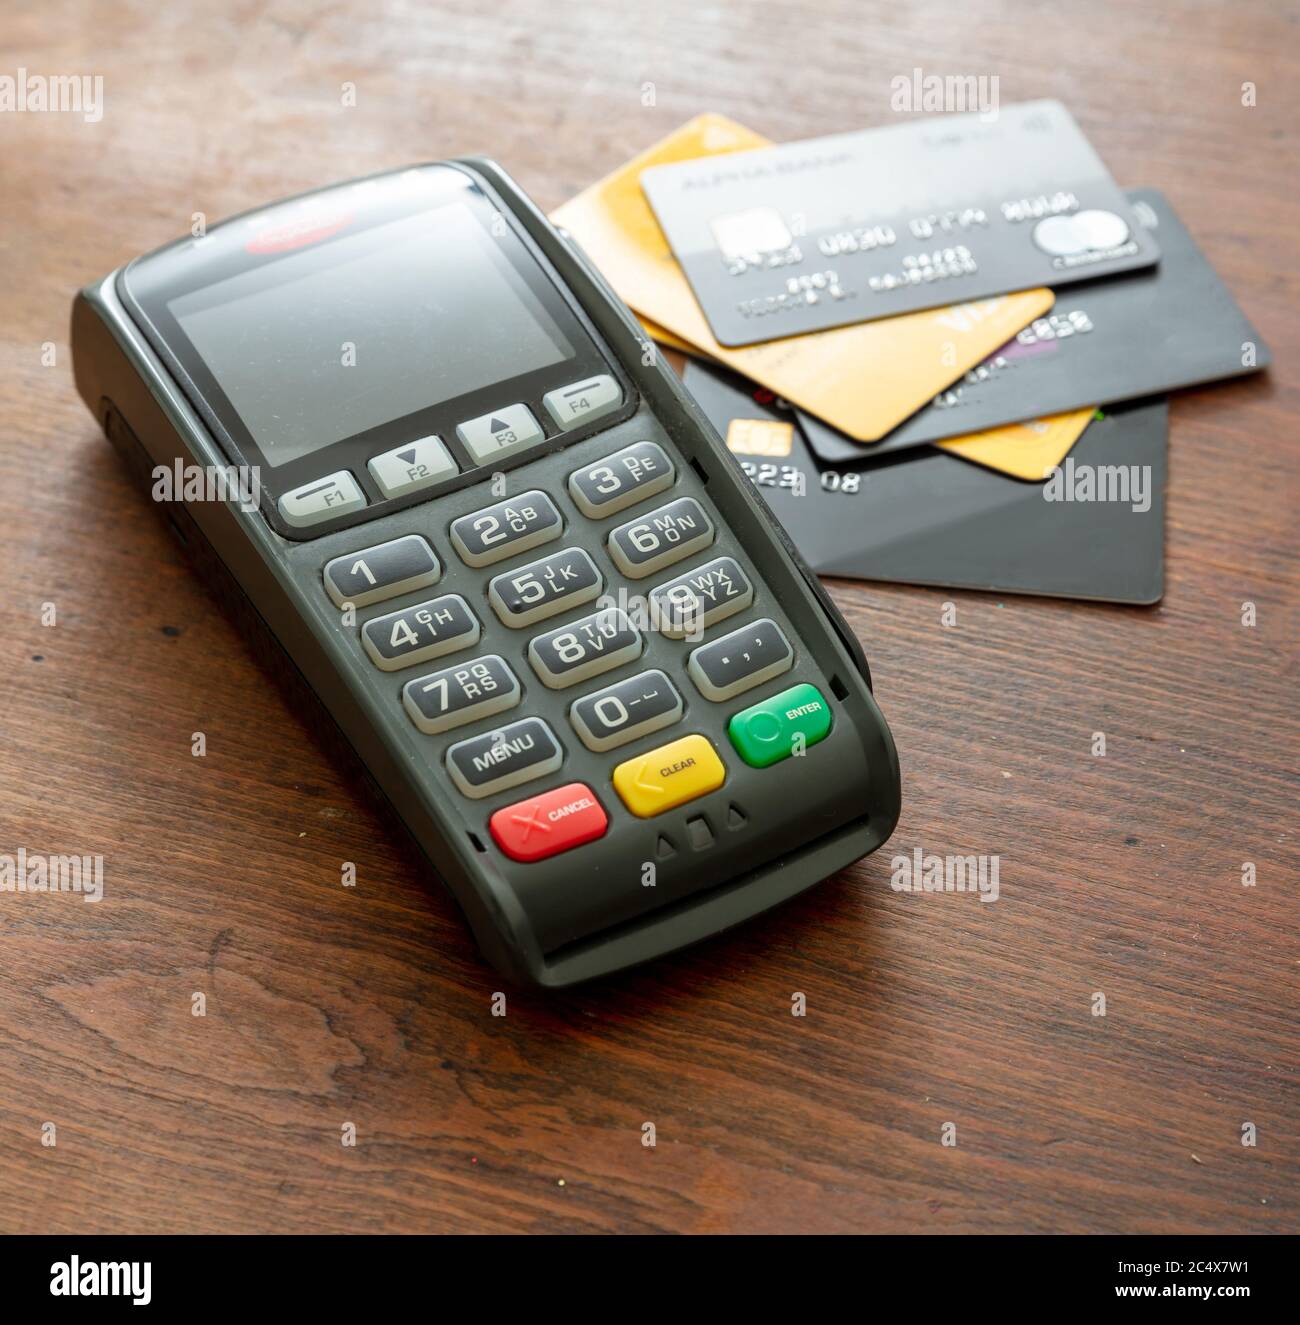 POS terminal and credit cards on wooden background, Terminal cash register machine for contactless payment. Banking equipment, Consumerism, shopping c Stock Photo